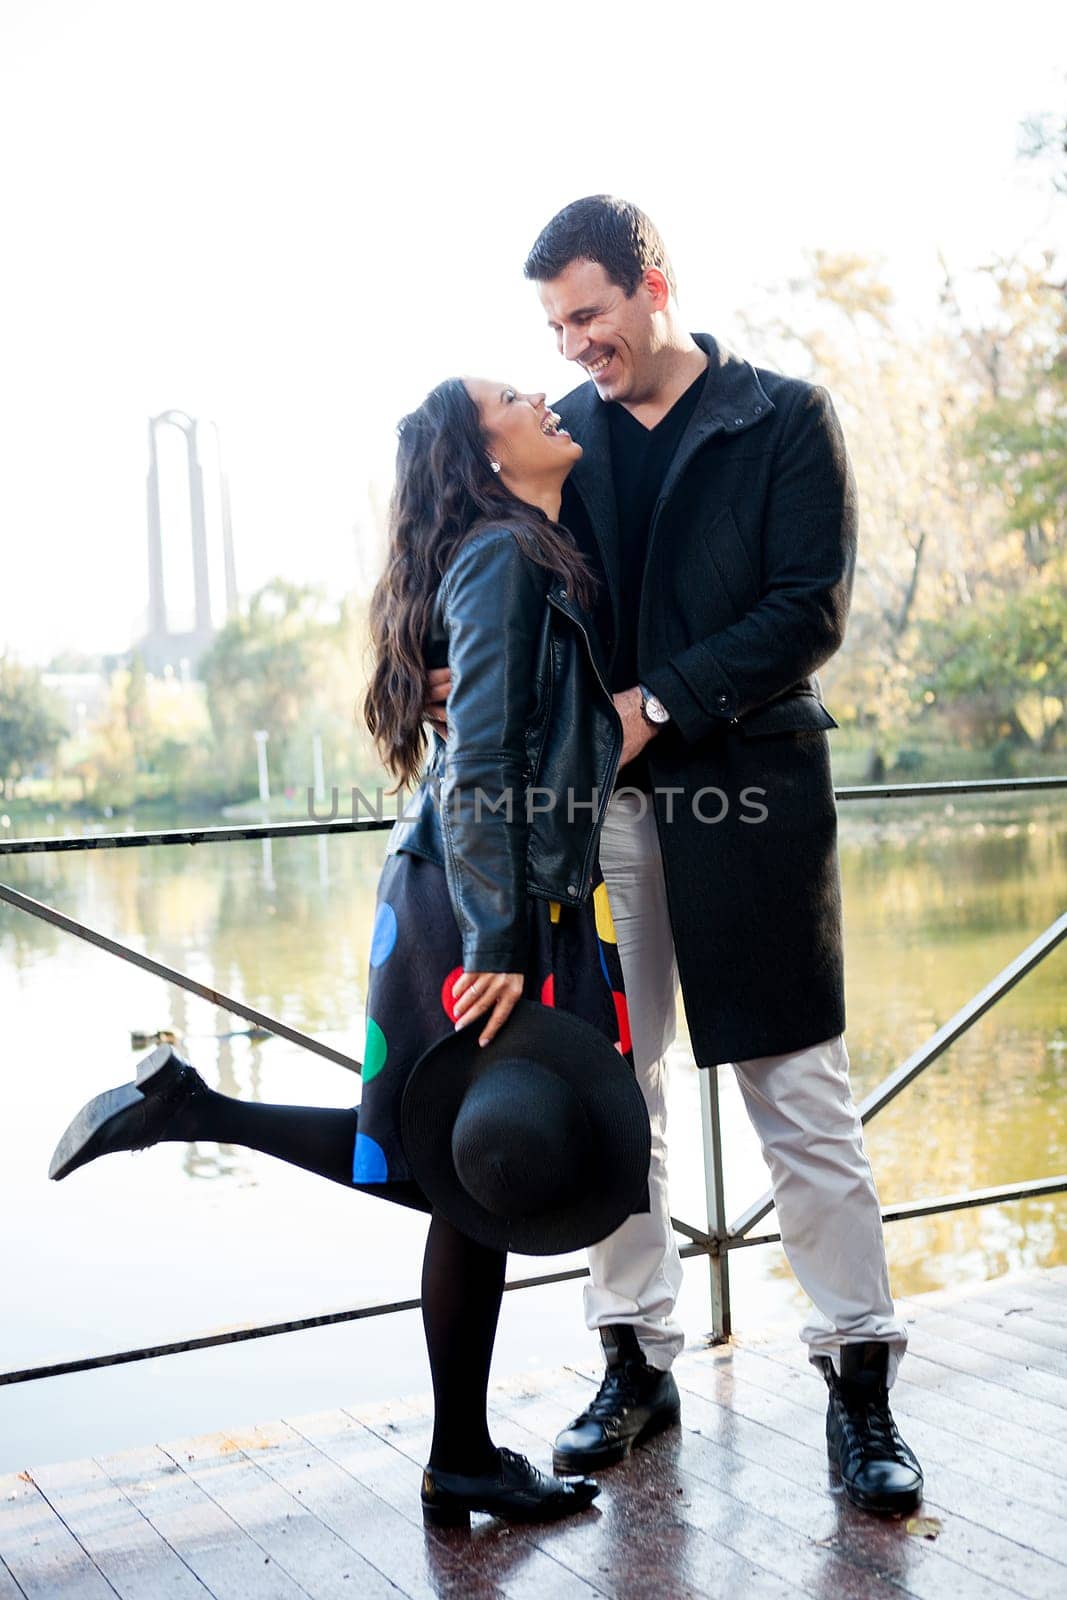 Beautiful gourgeous couple in park by DCStudio